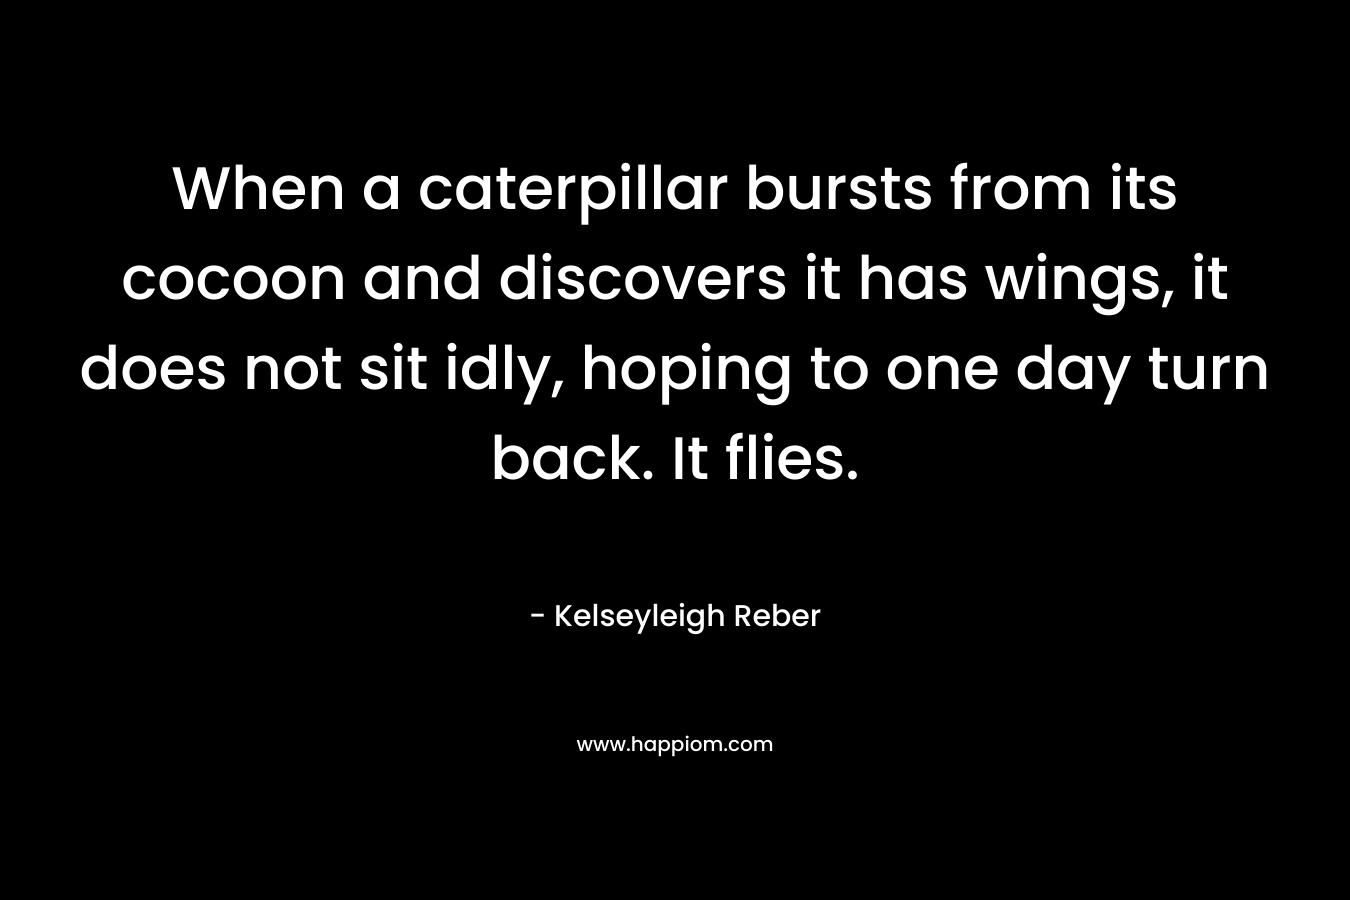 When a caterpillar bursts from its cocoon and discovers it has wings, it does not sit idly, hoping to one day turn back. It flies. – Kelseyleigh Reber